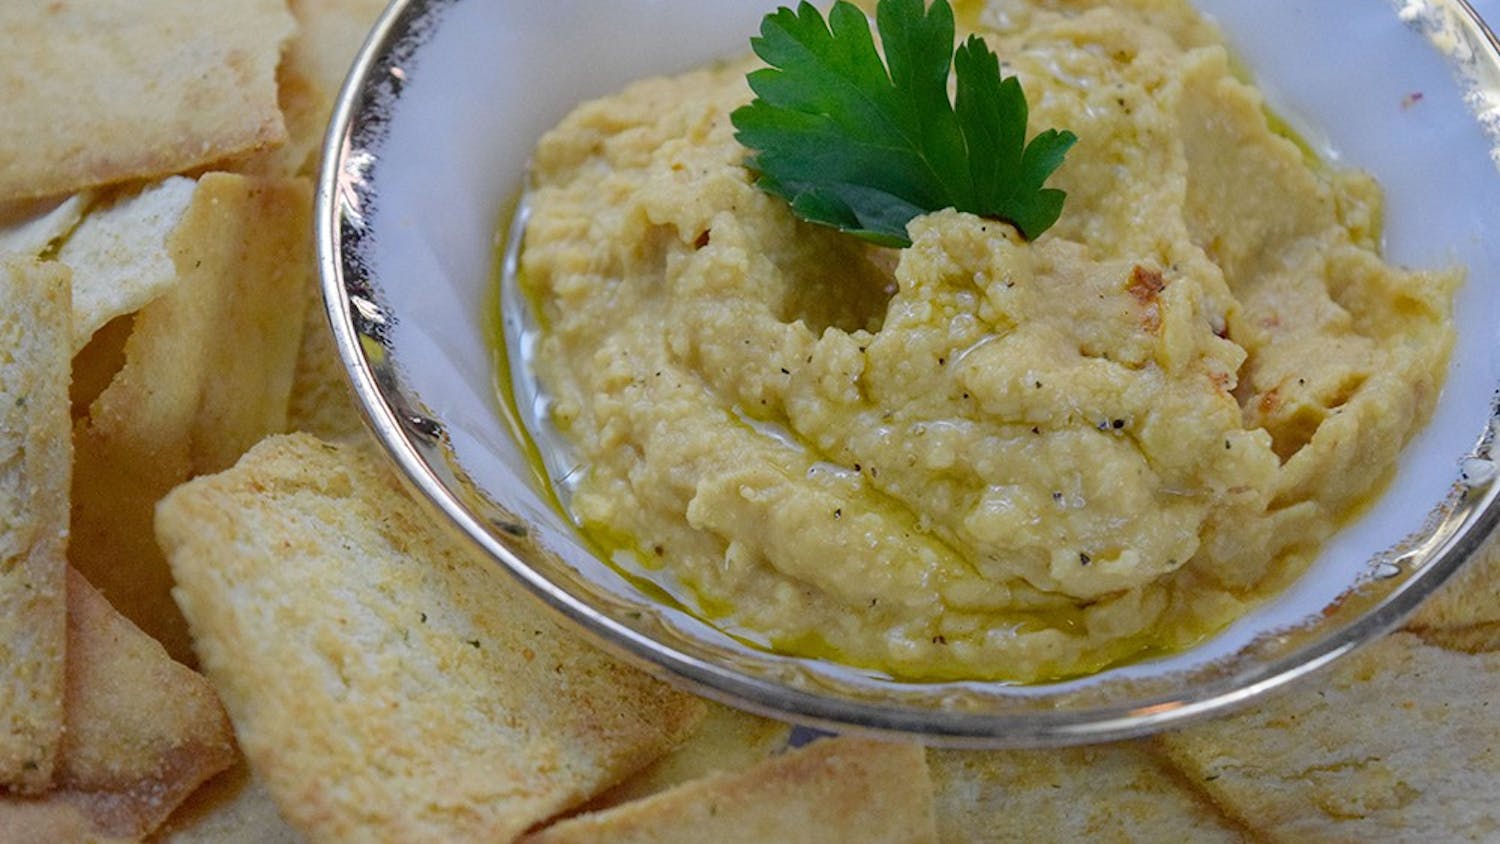 This hummus recipe puts a Korean twist on traditional hummus recipes and can be paired with pita chips or bread. 